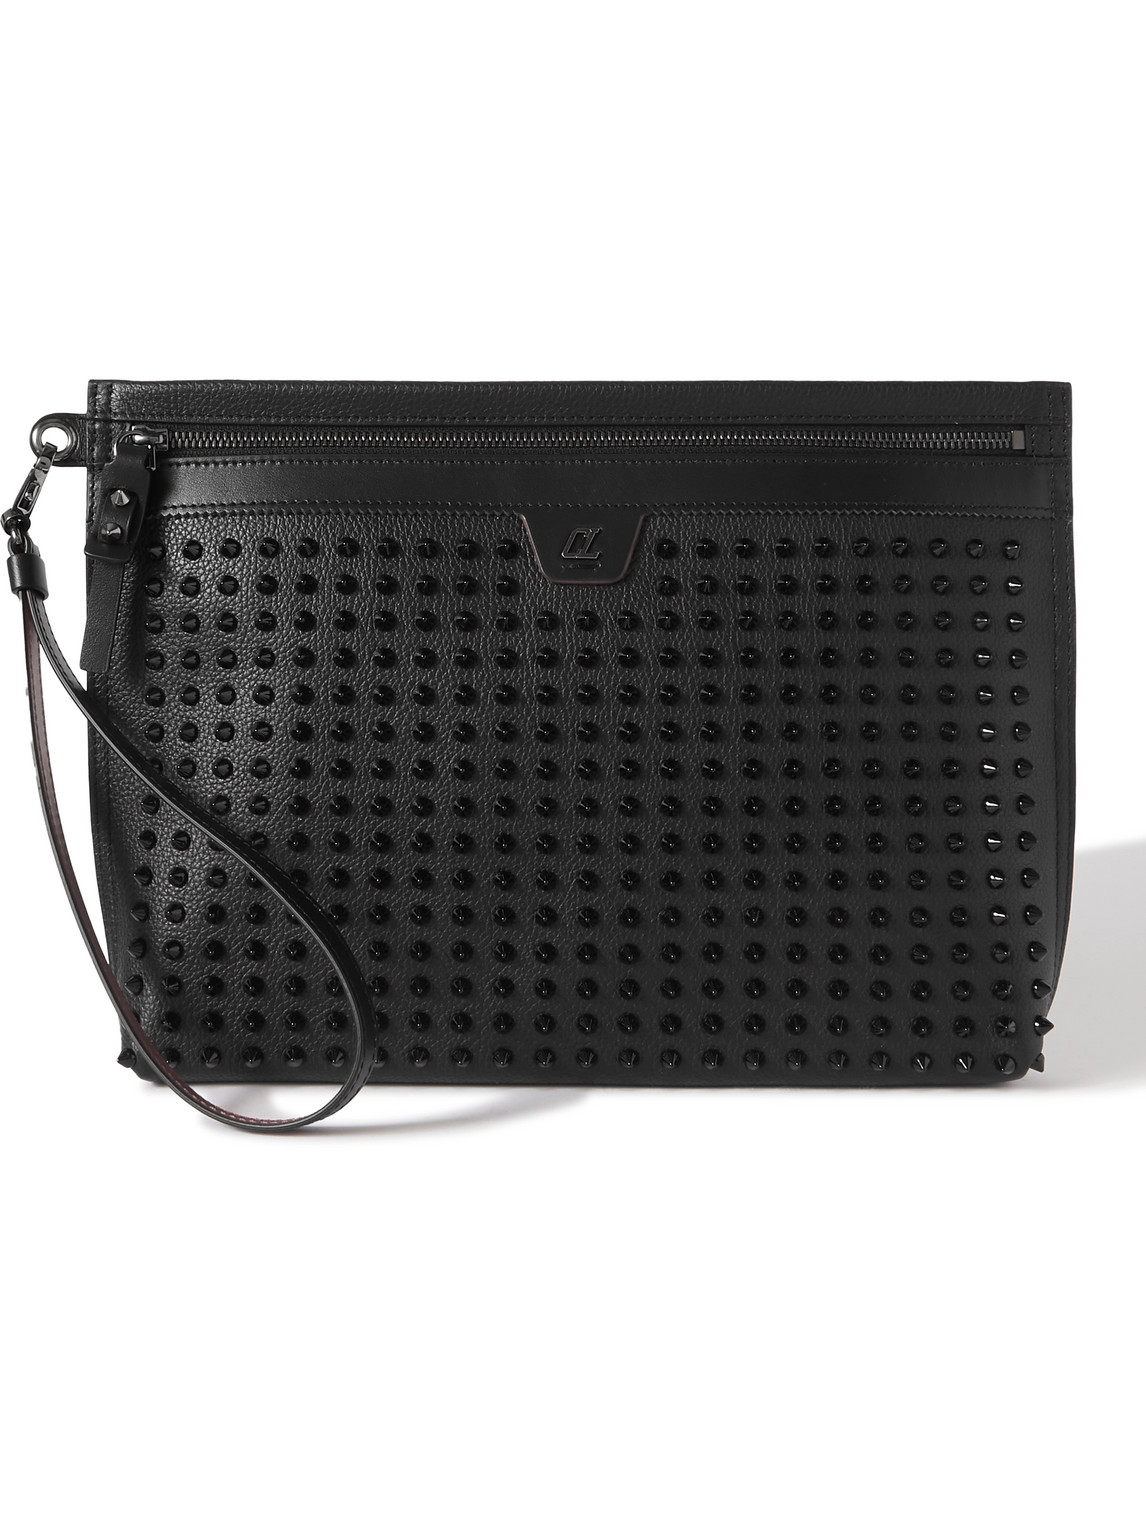 City Spiked Full-Grain Leather Pouch